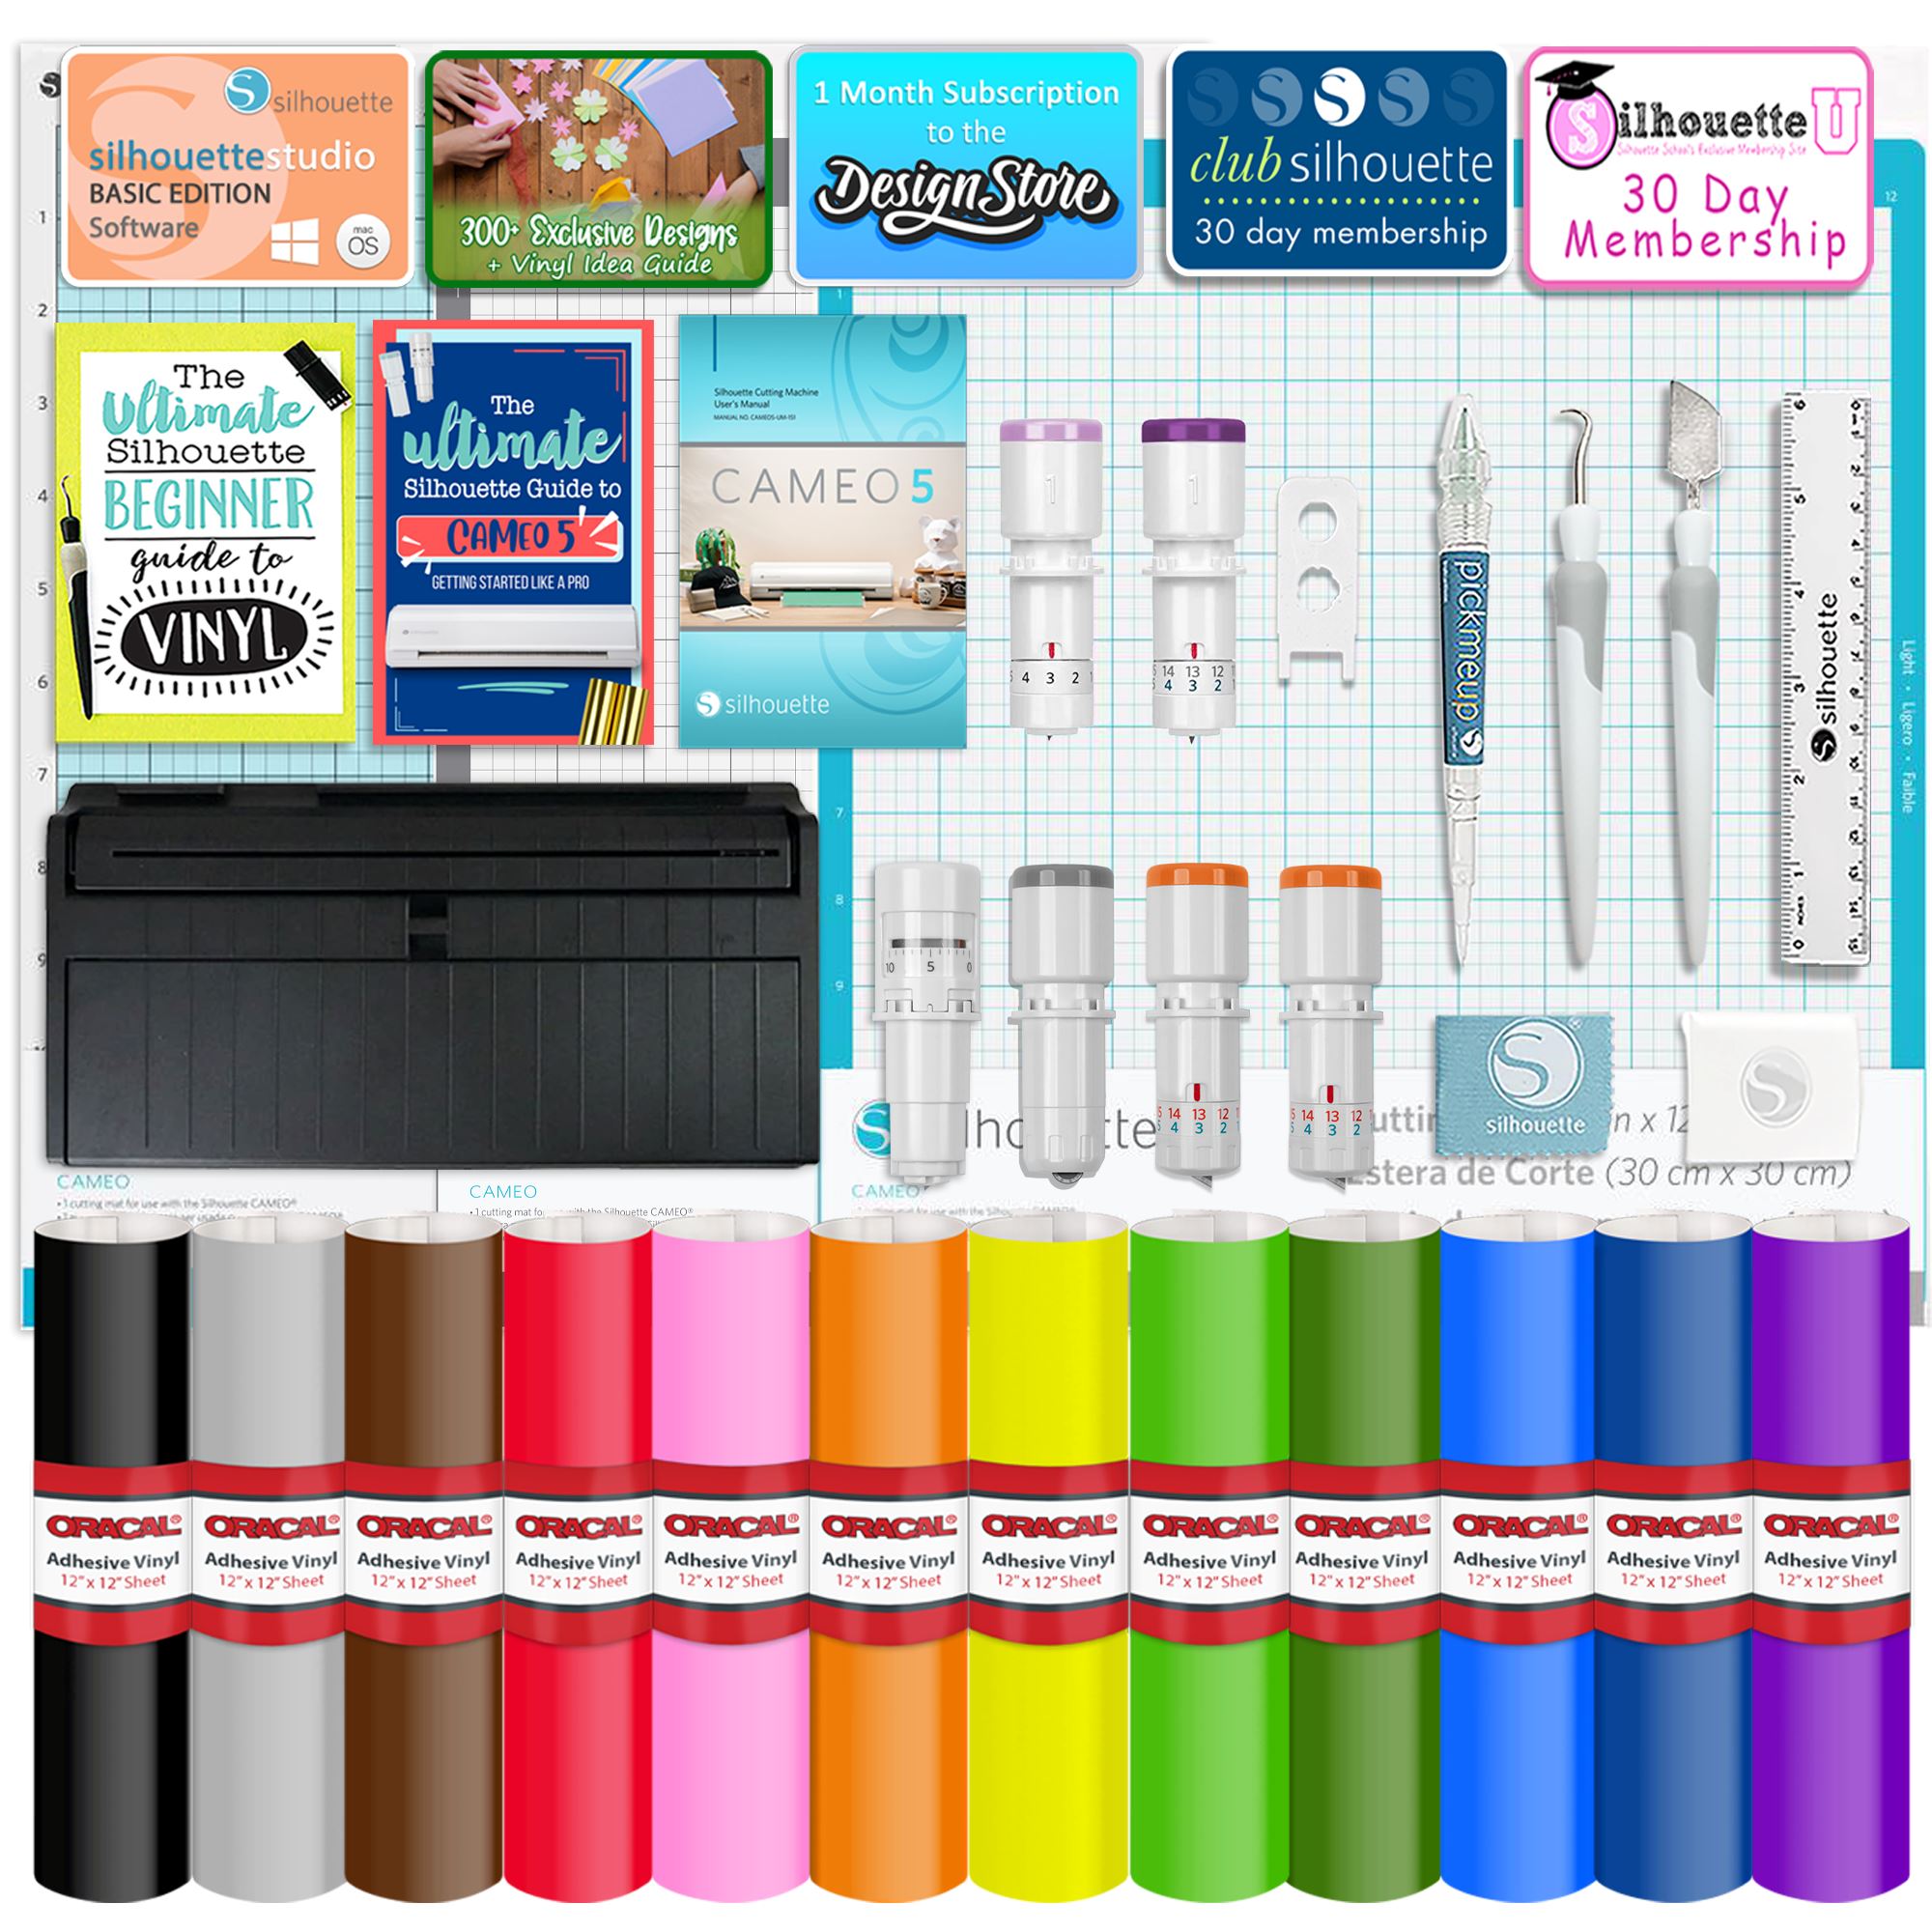 Silhouette Heat Transfer Printable Bundle- Includes 12 Sheets of Printable Vinyl (5 for Light Material, 5 for Dark Material, 2 Fabric Sheets), and A